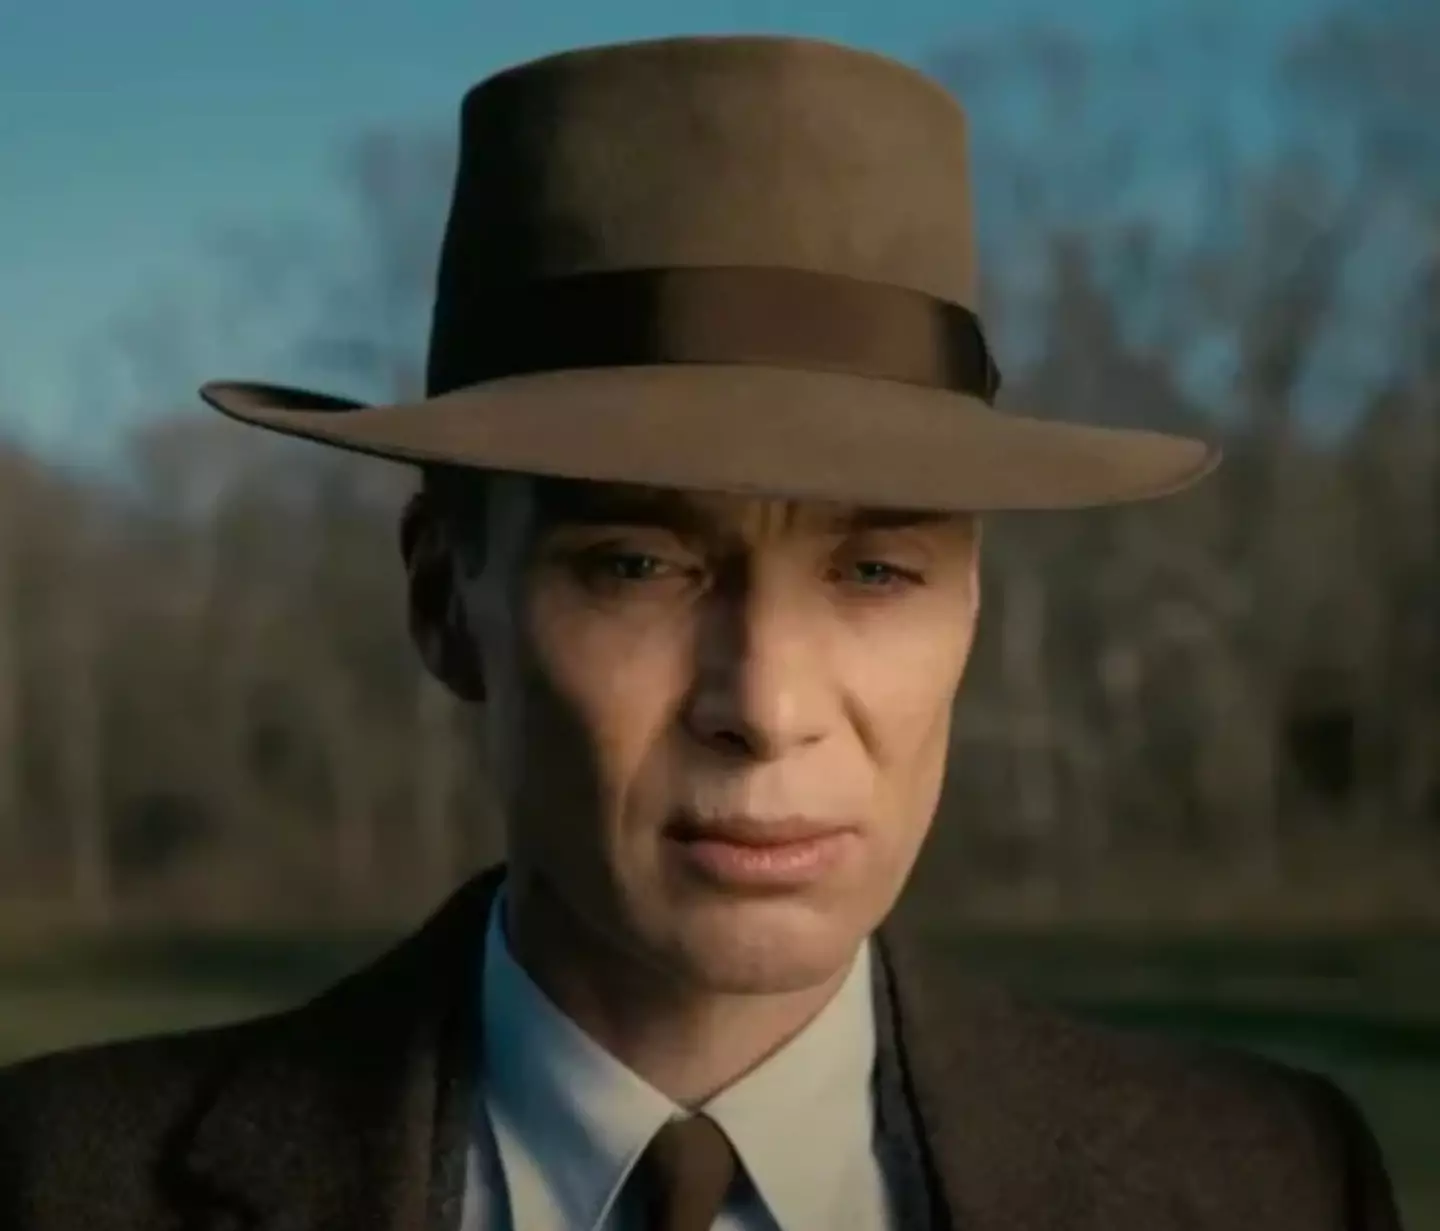 Cillian Murphy has been nominated for an Oscar for his role in Oppenheimer.